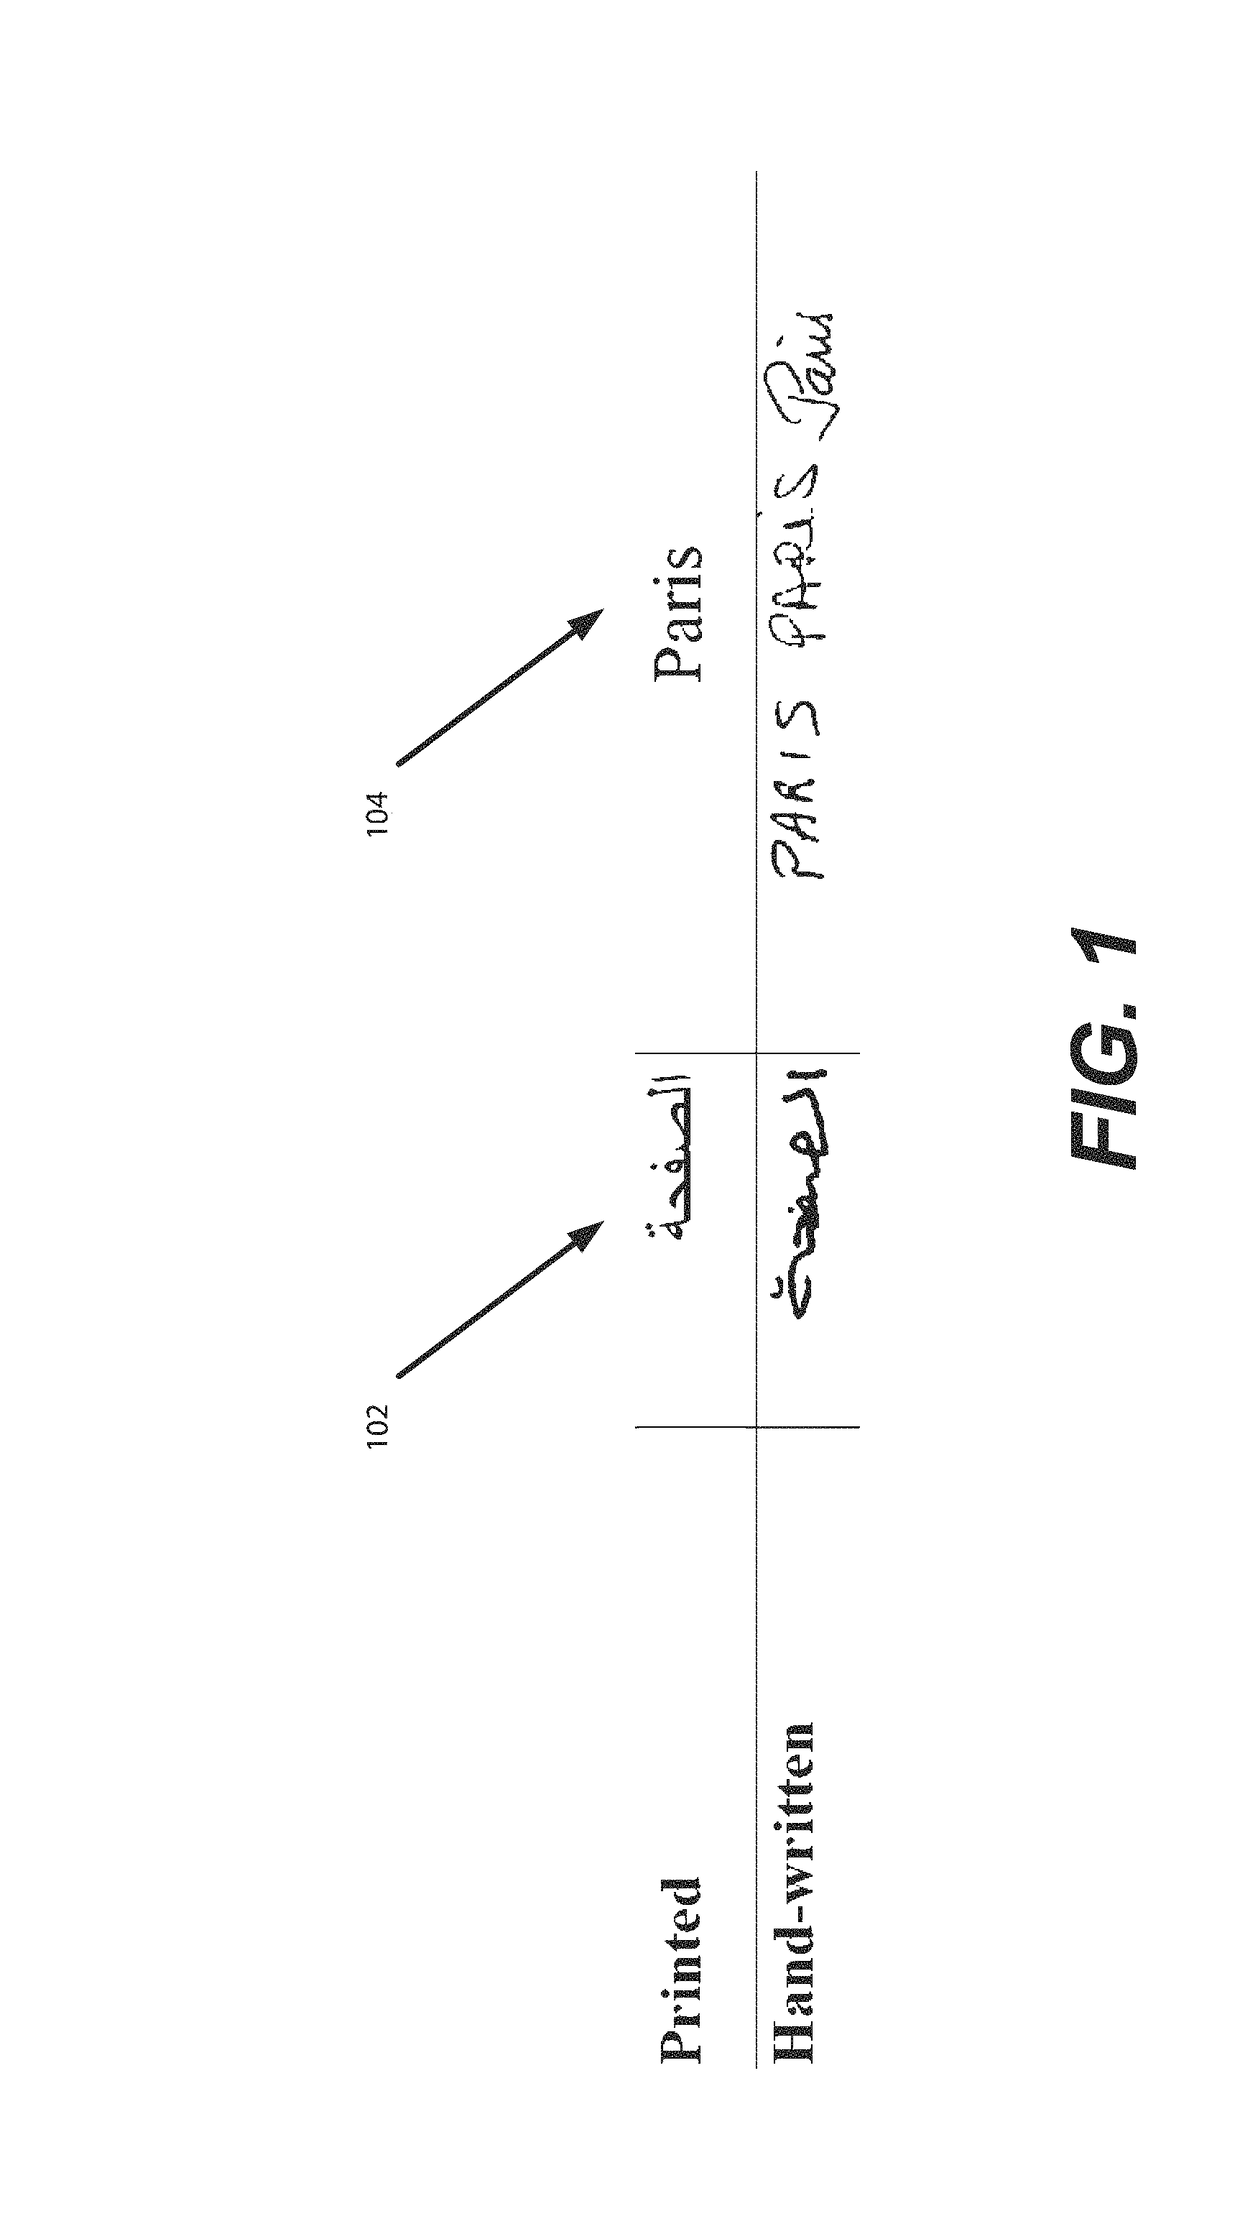 Arabic handwriting synthesis system and method